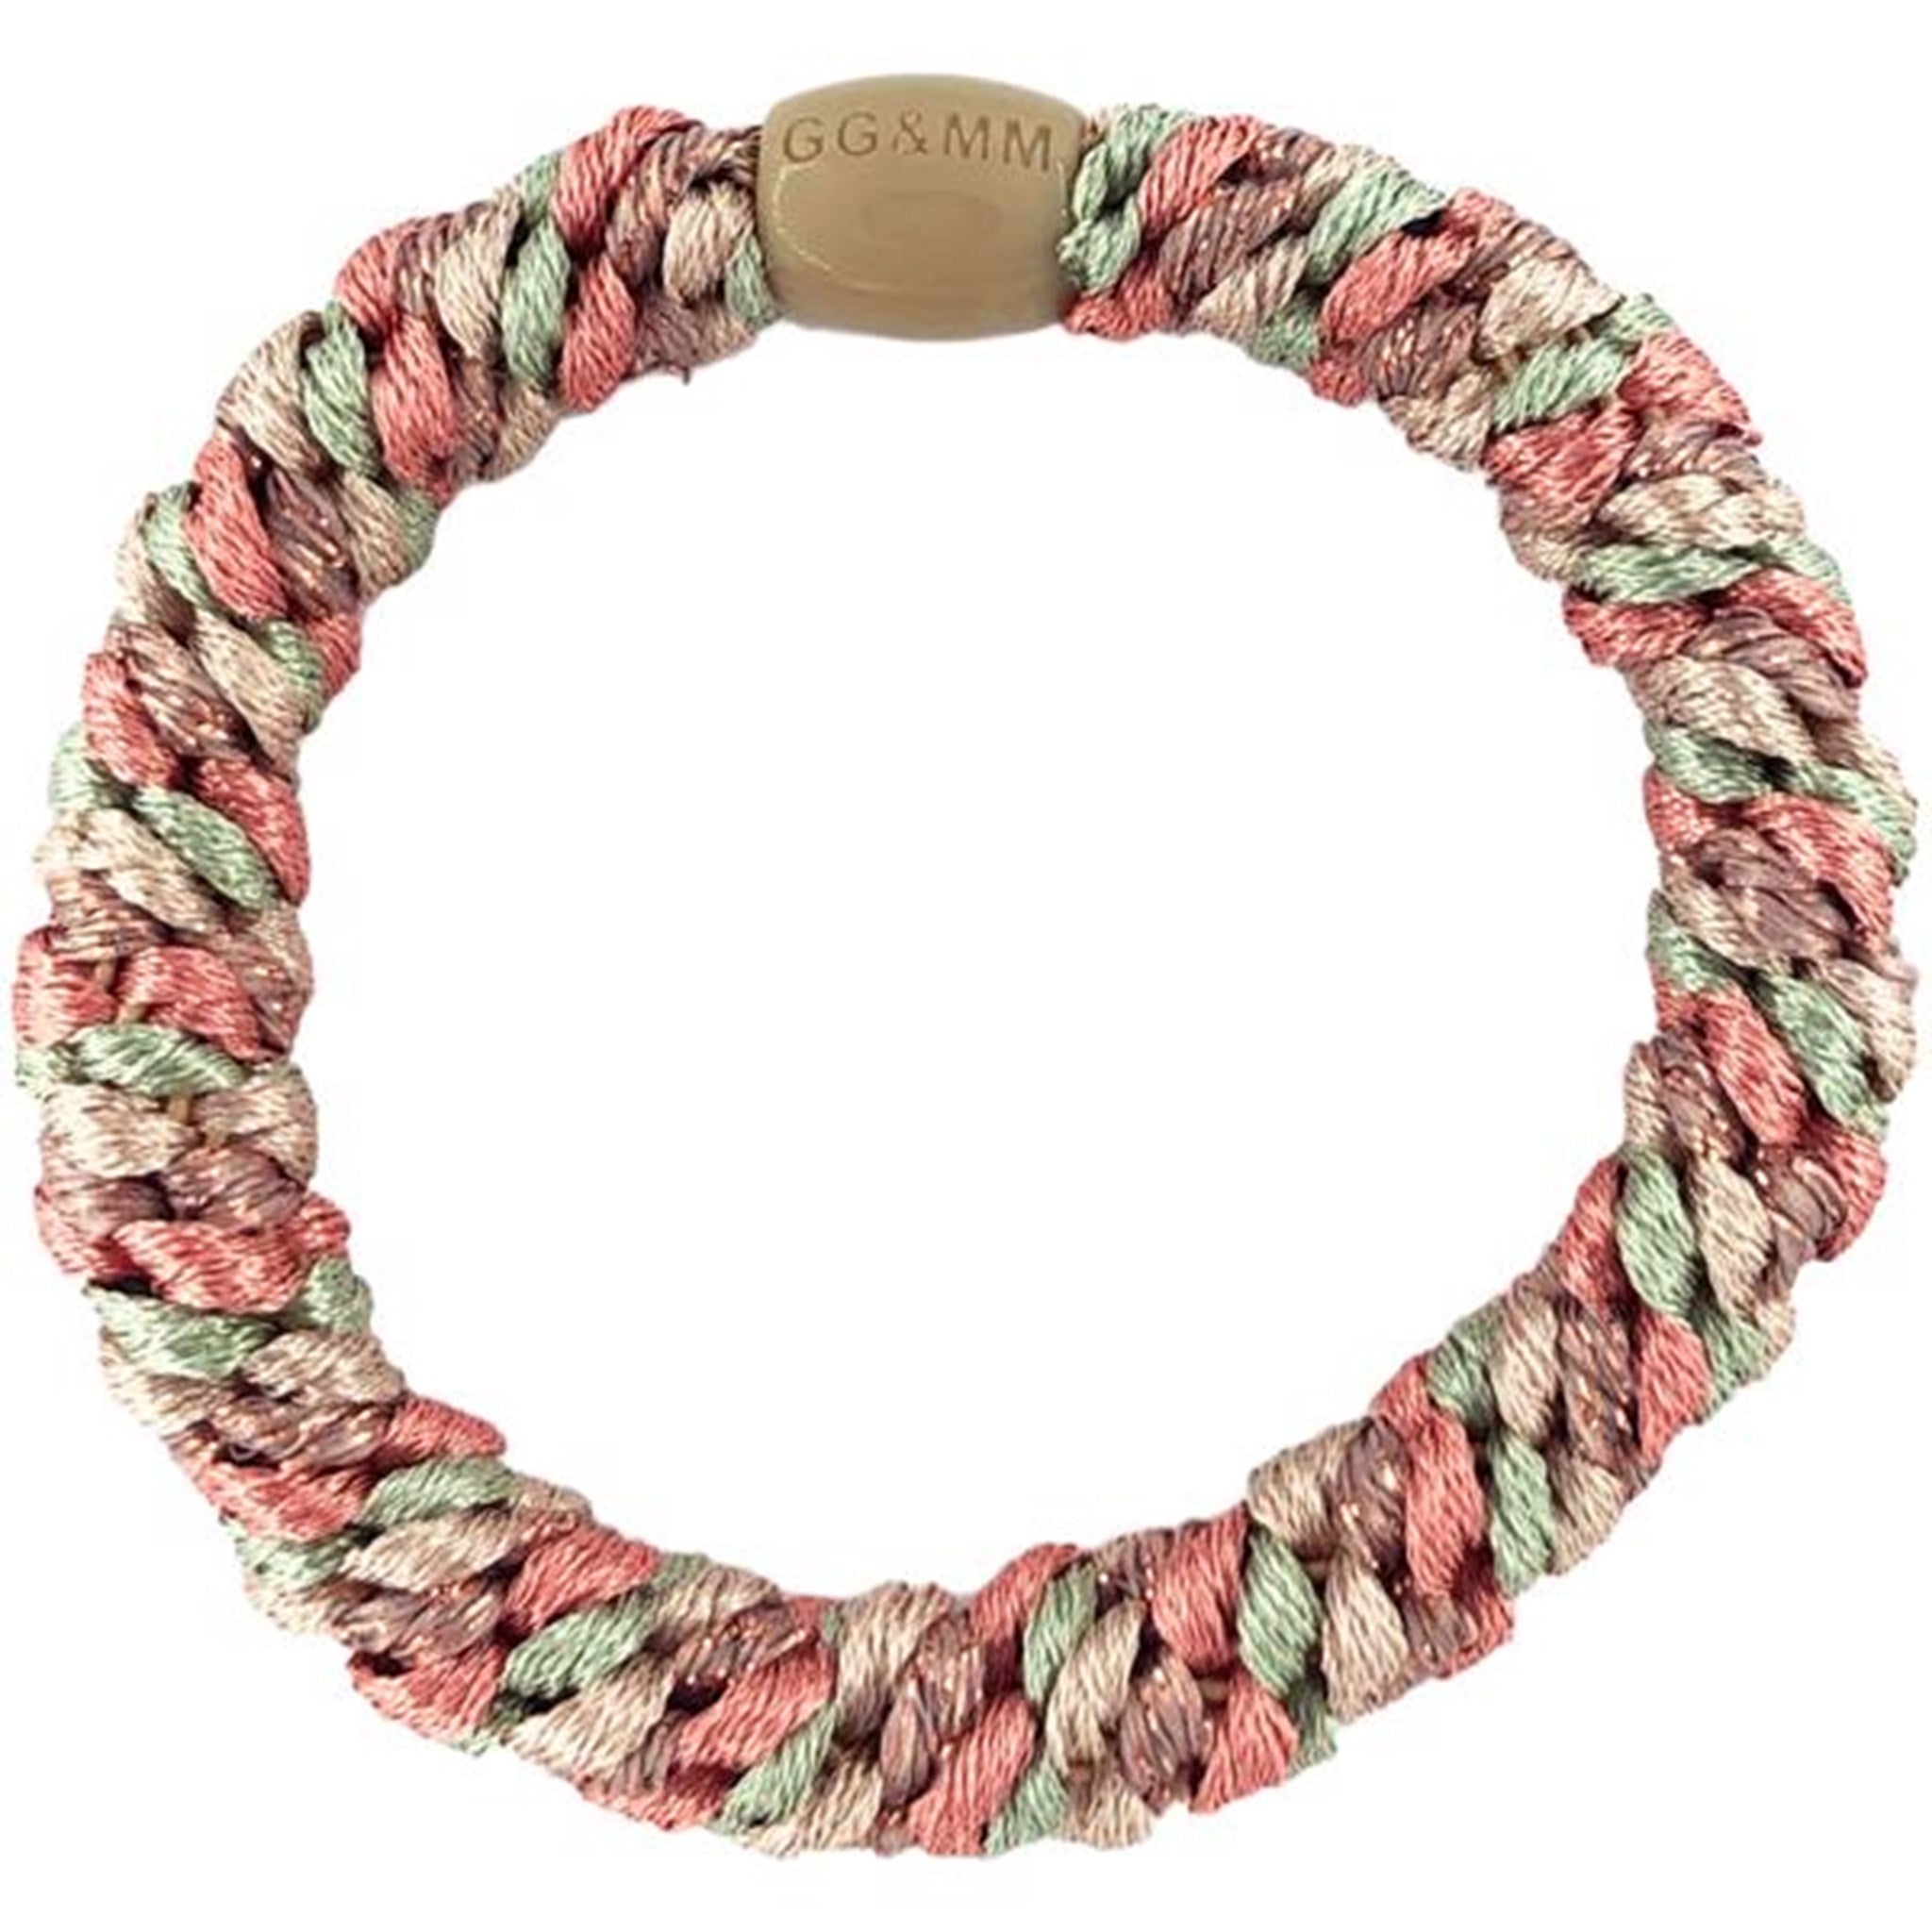 Bow's by Stær Braided Hairties Multi Rose, Mint & Beige Glitter